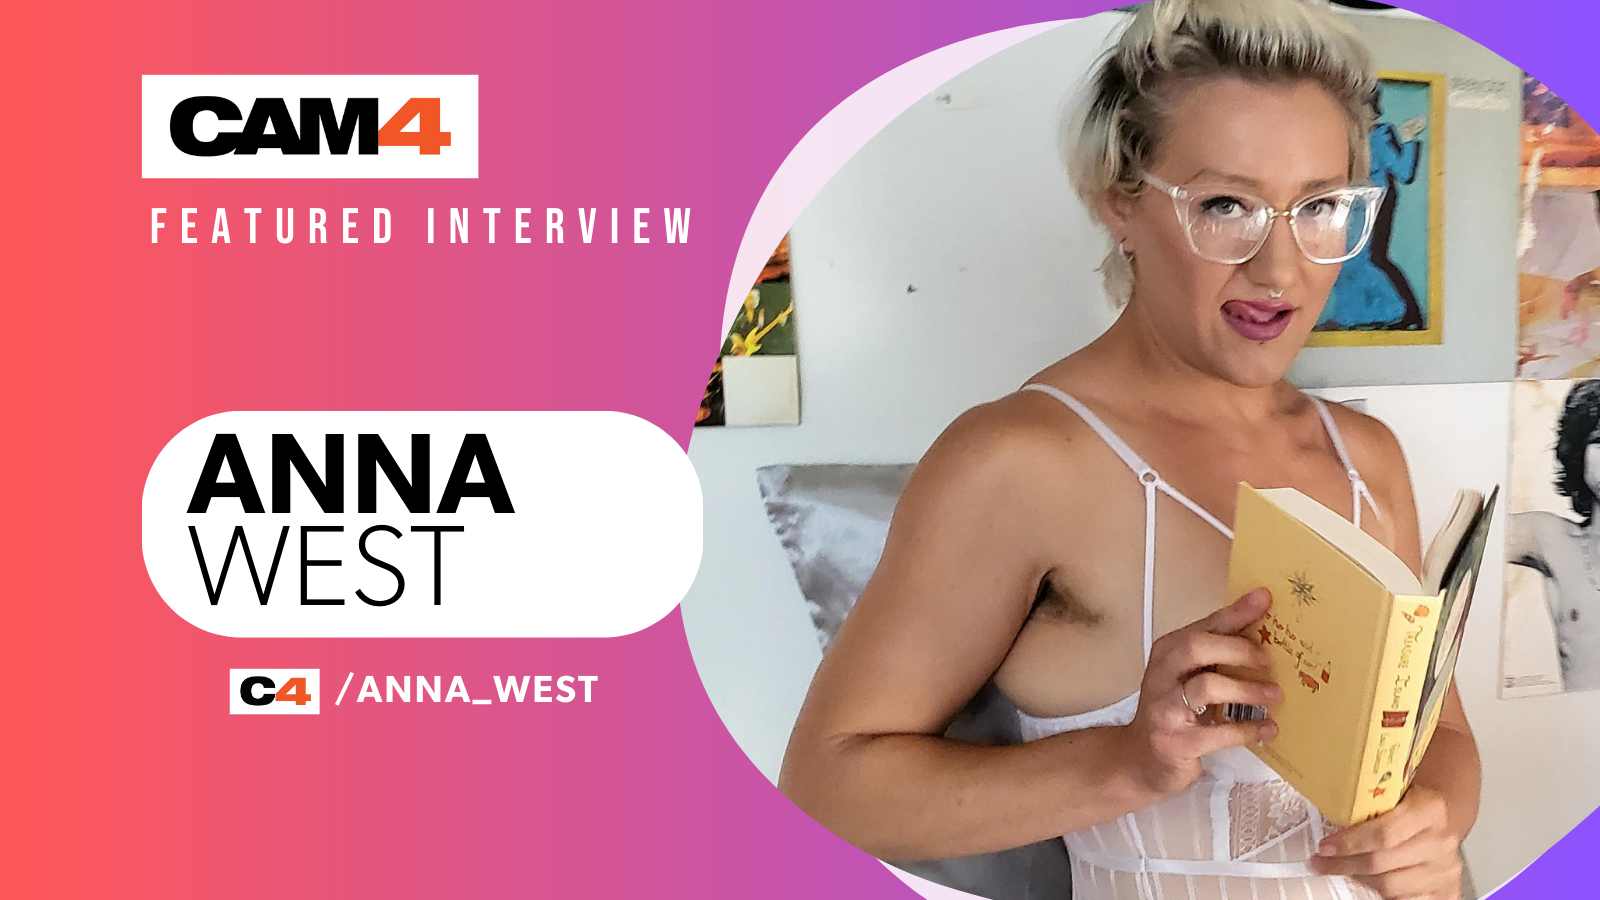 THE ART OF CAMMING: AN EXPLORATION THROUGH THE EYES OF ANNA_WEST